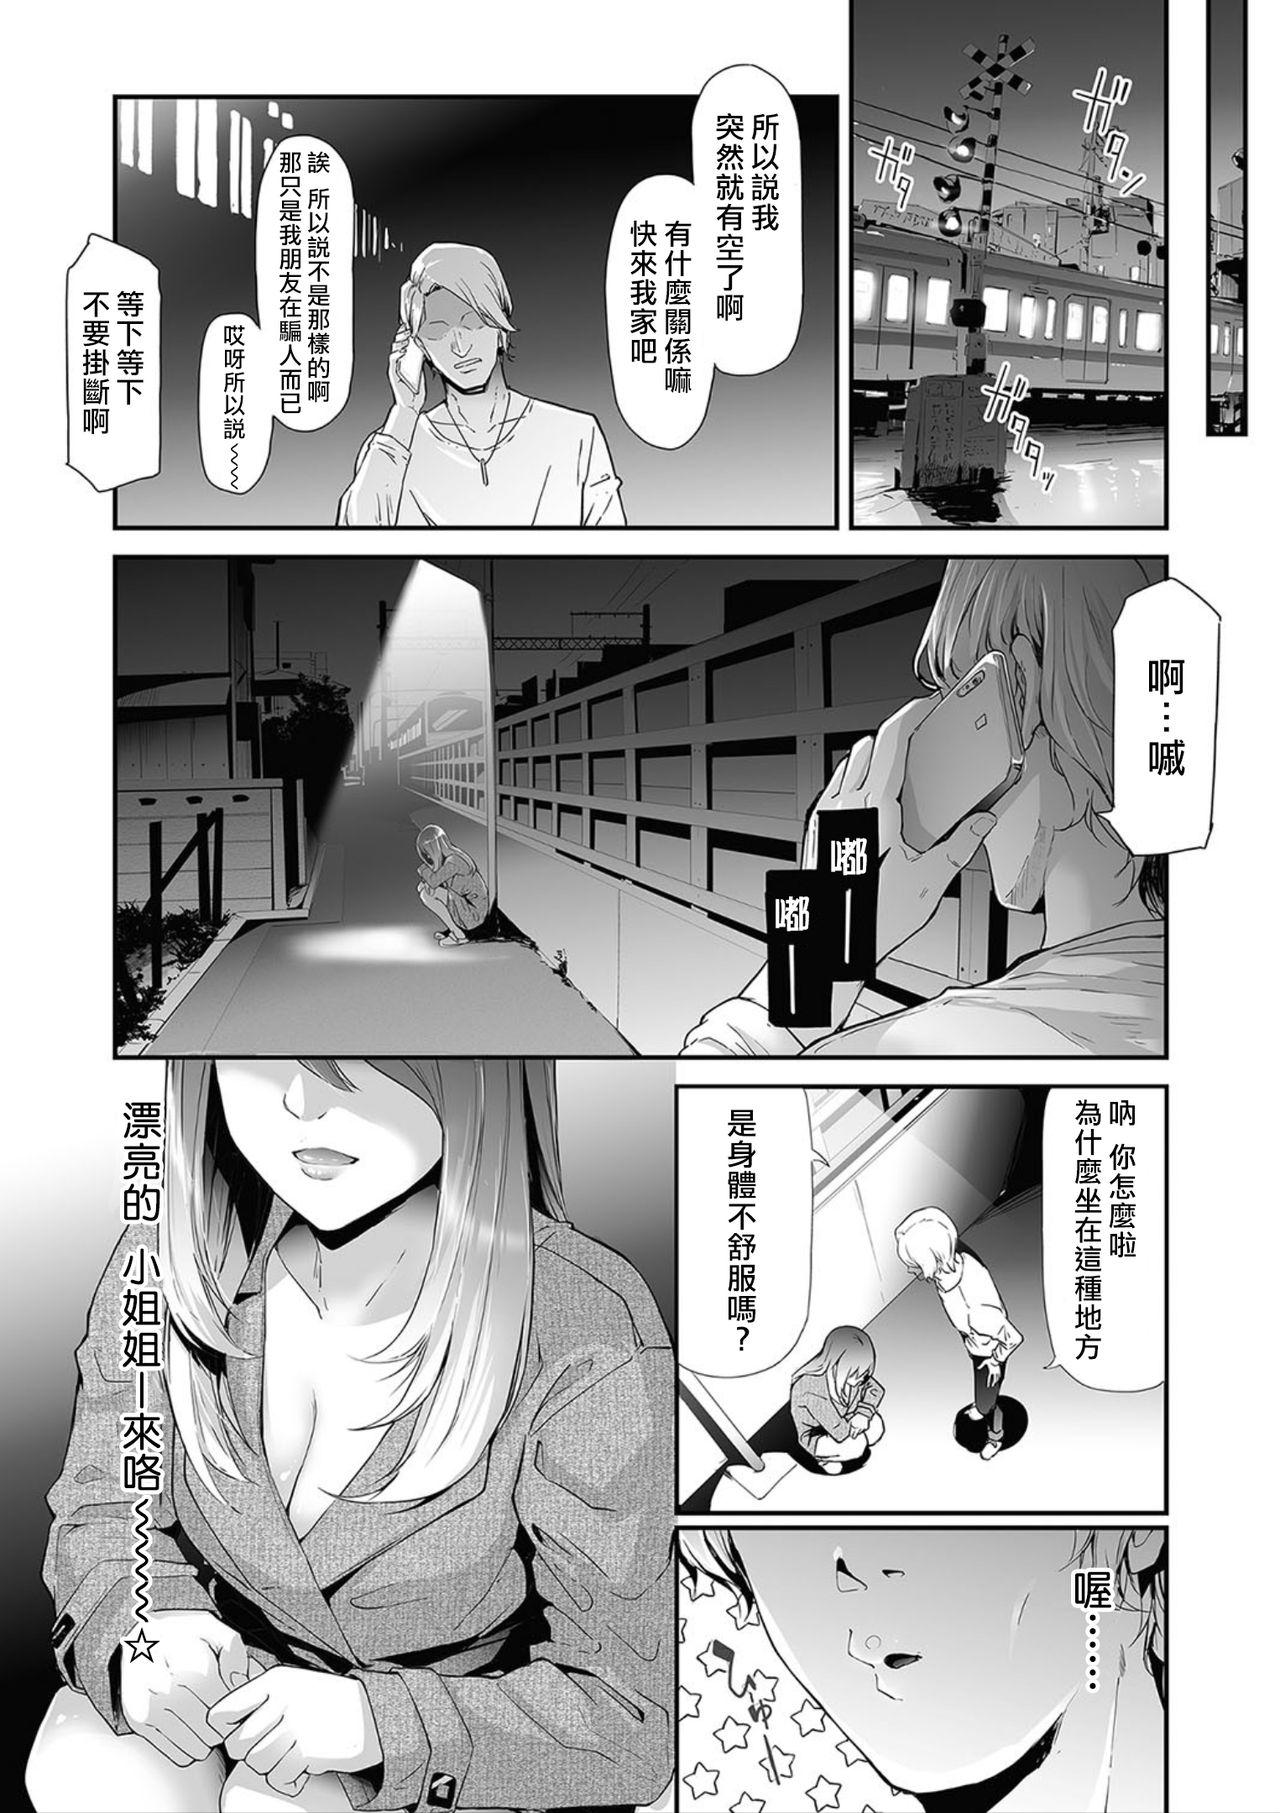 Chichona TS☆Revolution＜Ch.1＞ Audition - Page 2